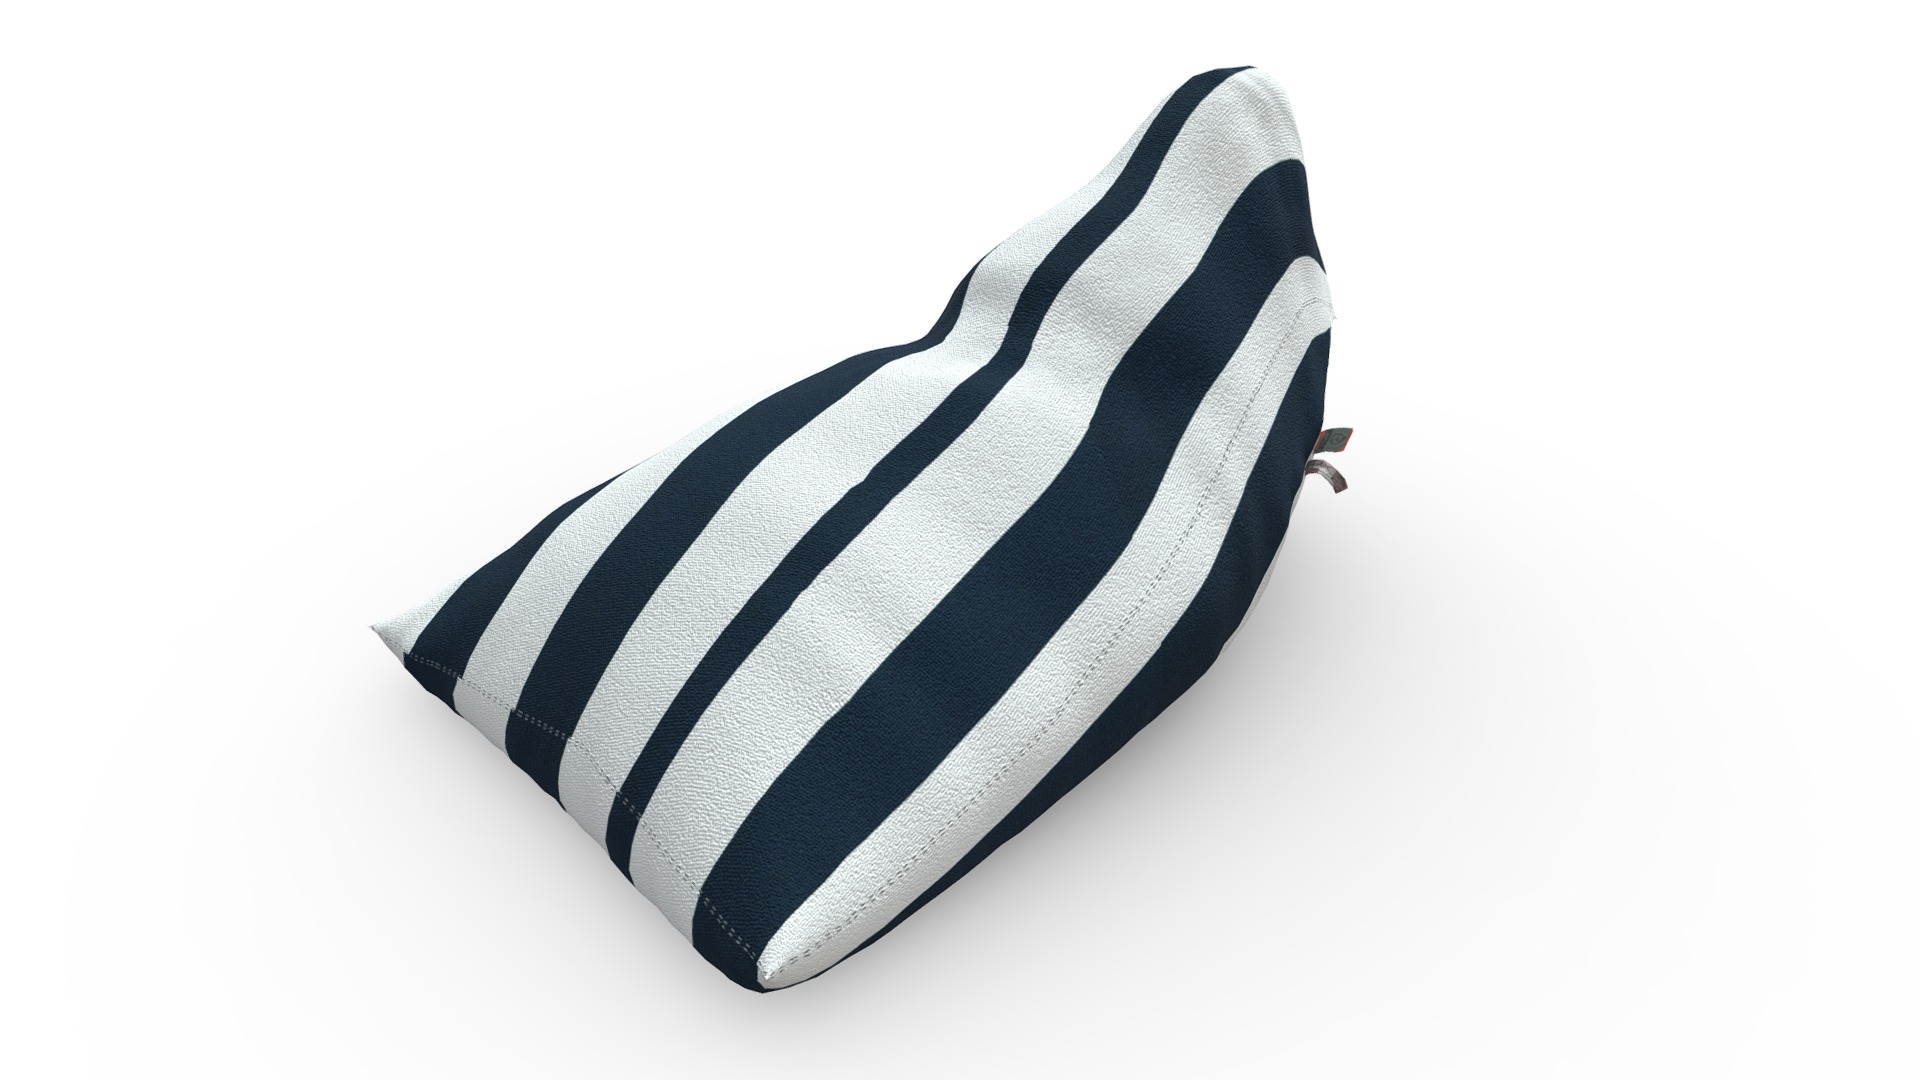 3D model Sack Bean Bag - This is a 3D model of the Sack Bean Bag. The 3D model is about a black and white striped hat.